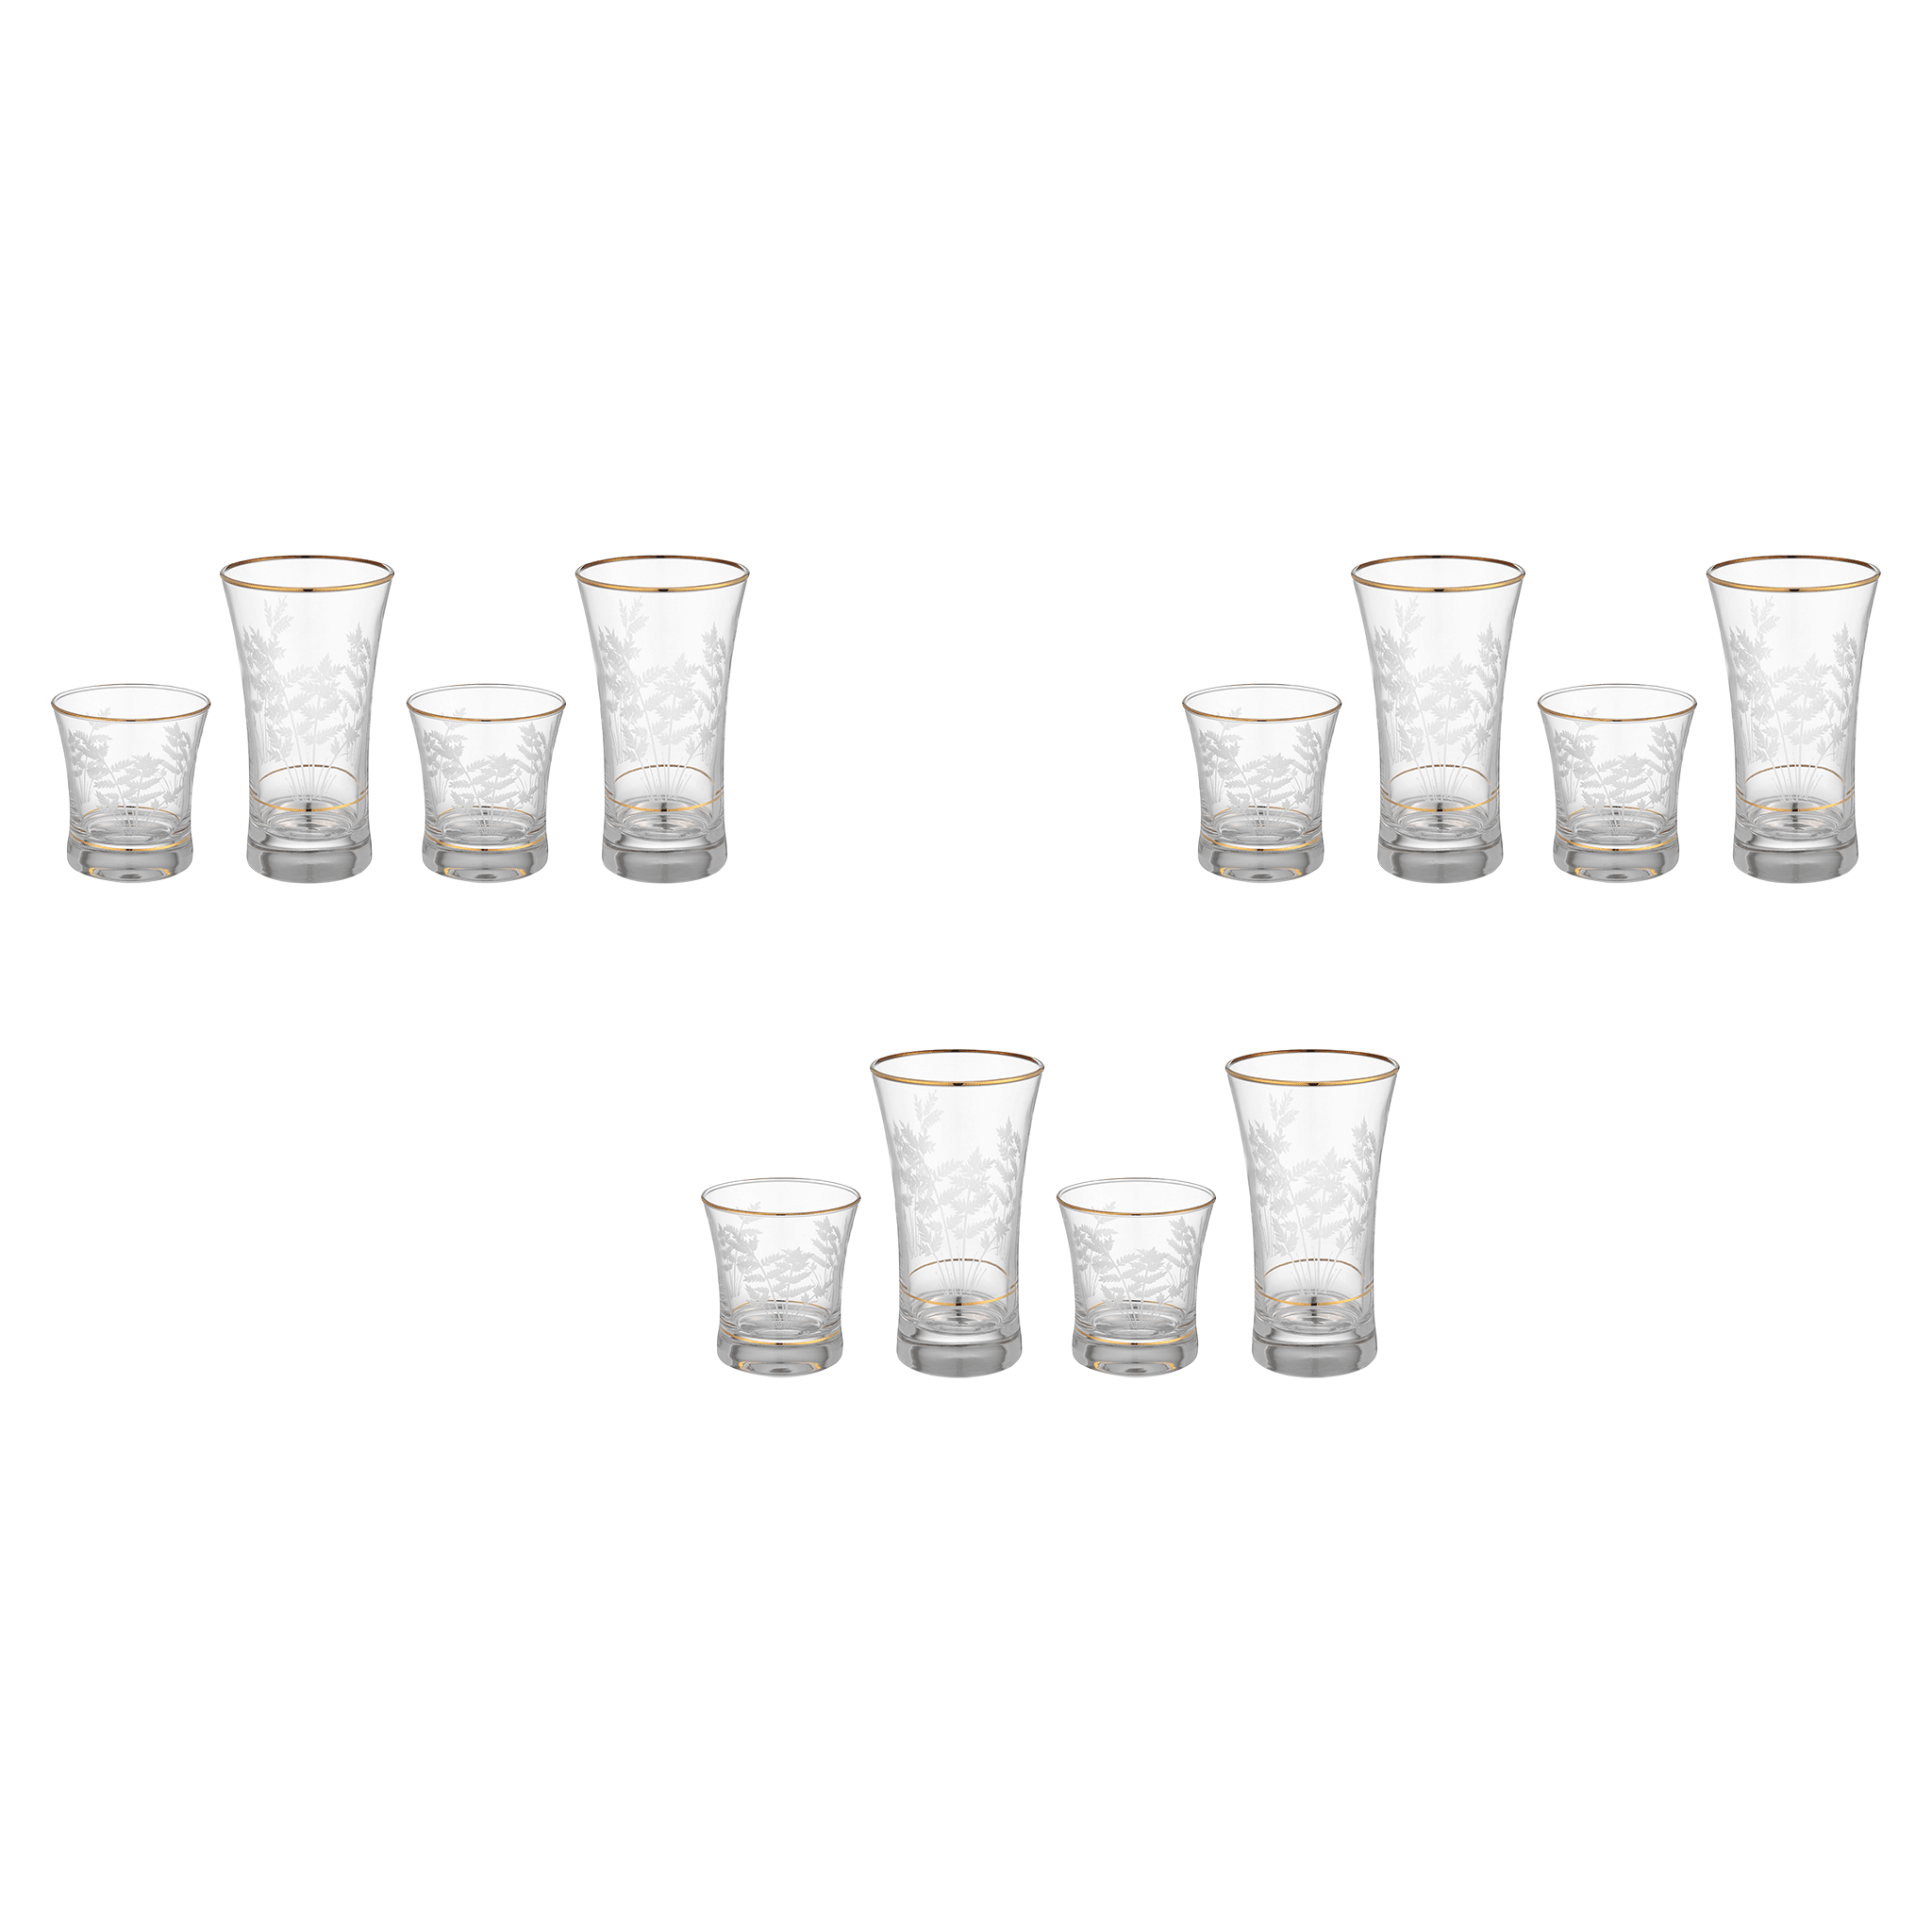 Pasabahce - Decorated Highball & Tumbler Glass 12 Pieces - Gold - Glass - 340ml&250ml - 39000798